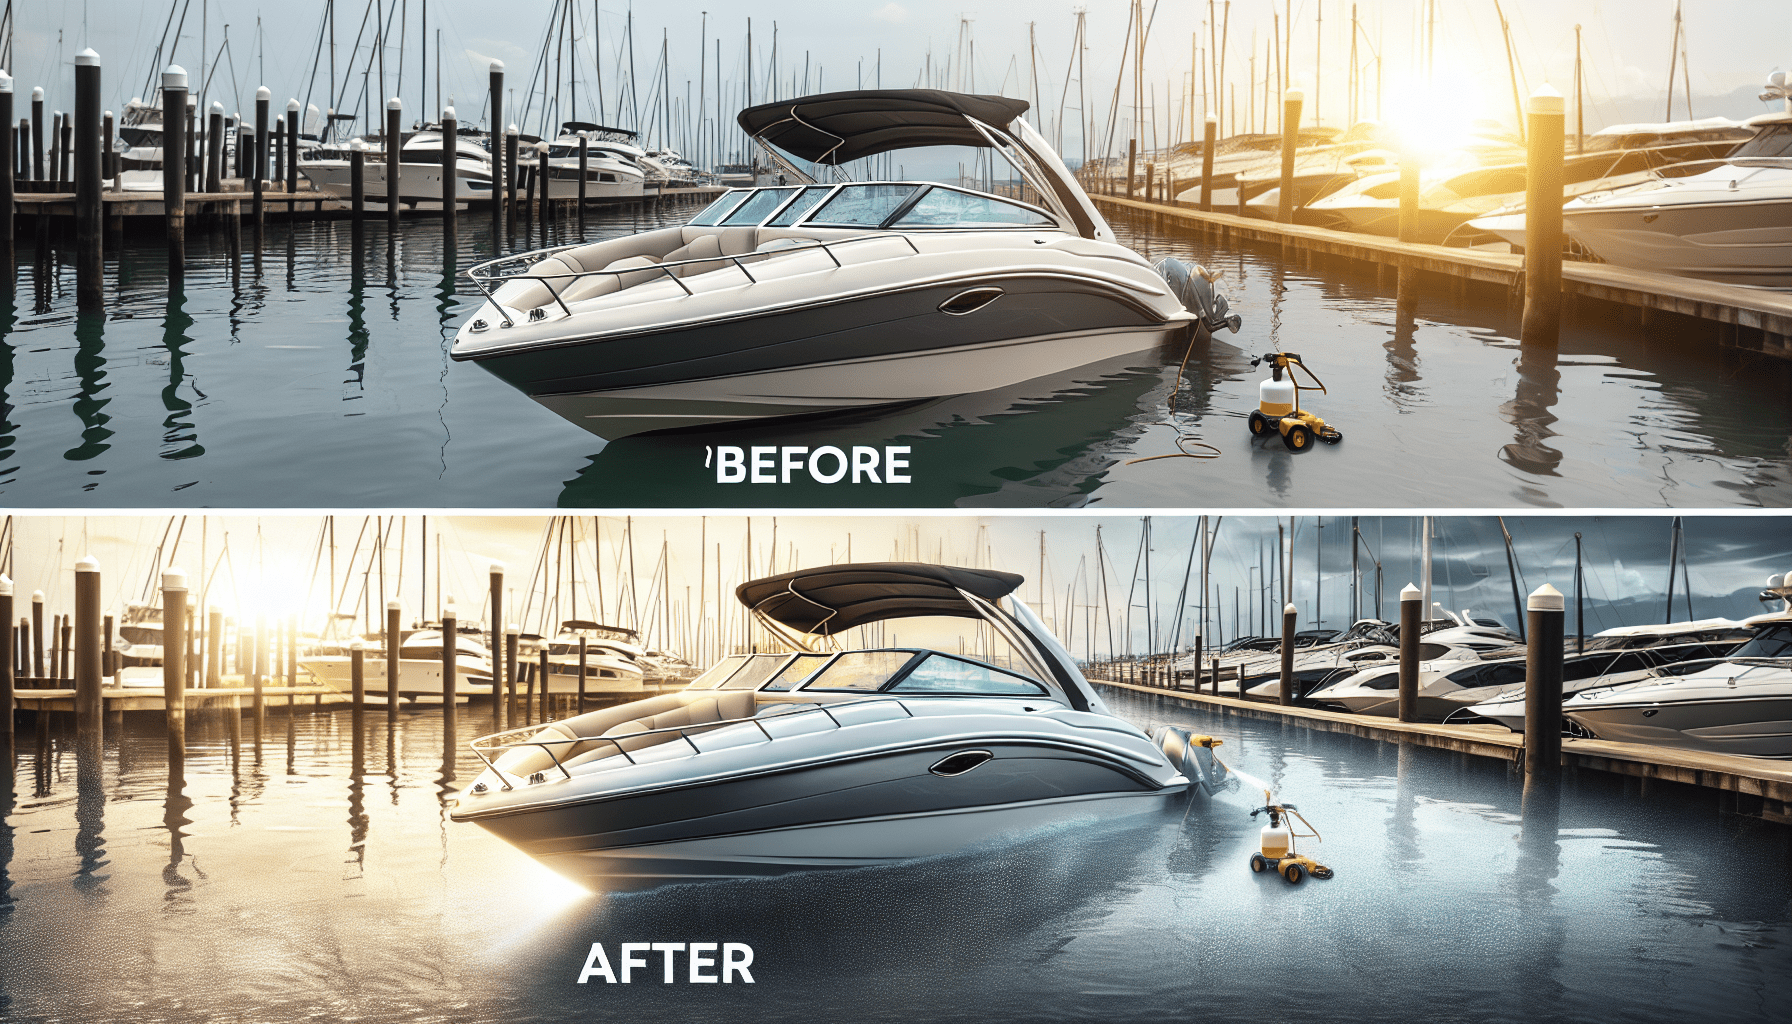 what are the top 3 benefits of ceramic coatings in boat detailing